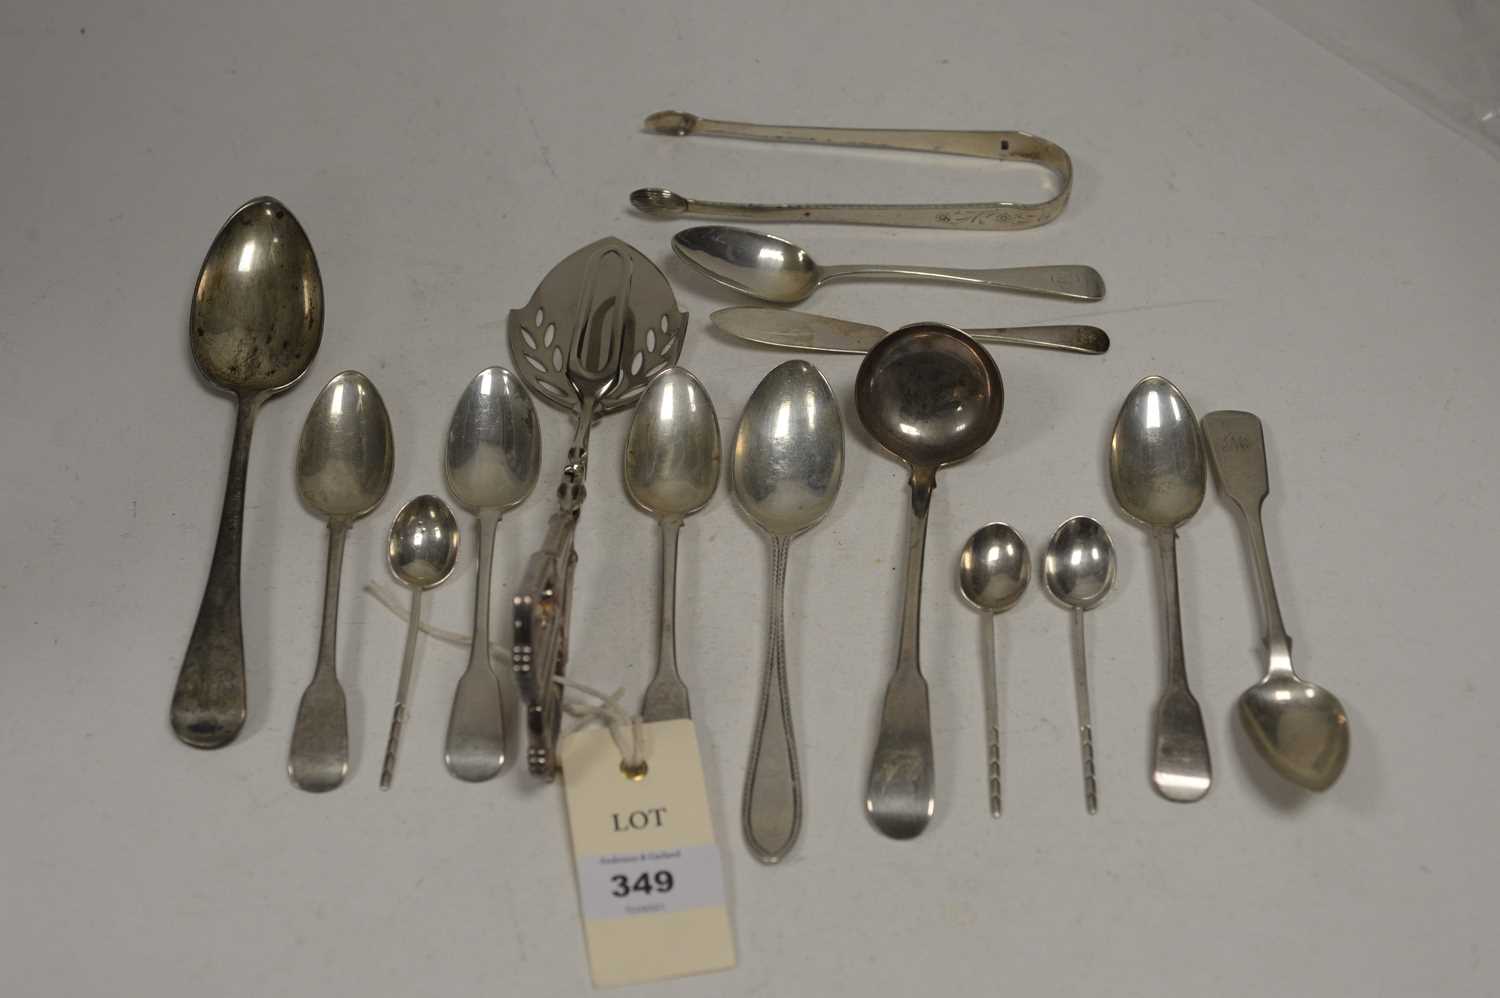 Lot 349 - Silver teaspoons, dessert spoons, ladle and other items